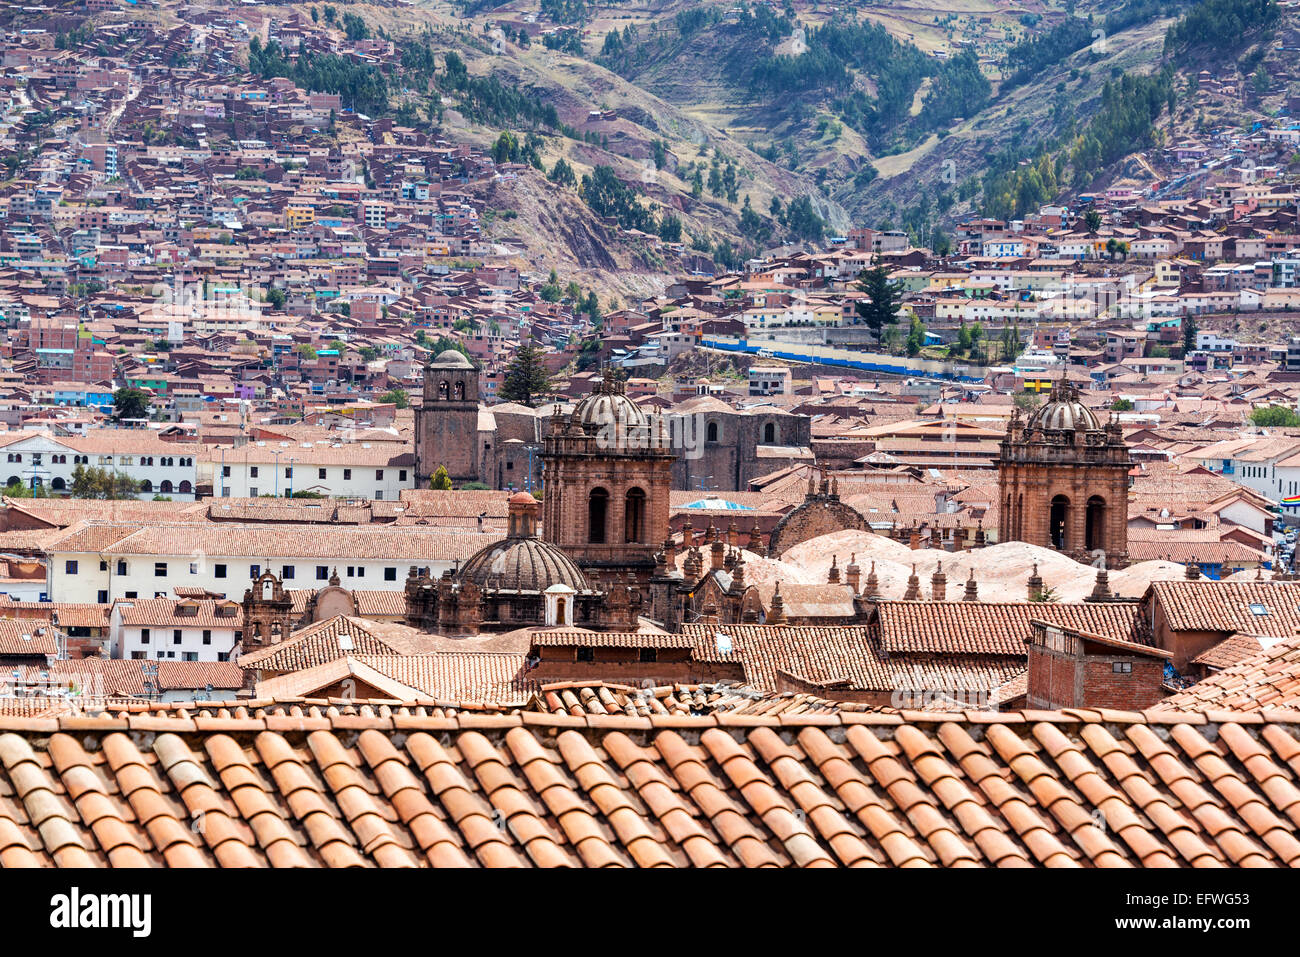 Cityscape of Cusco, Peru with several churches visible Stock Photo